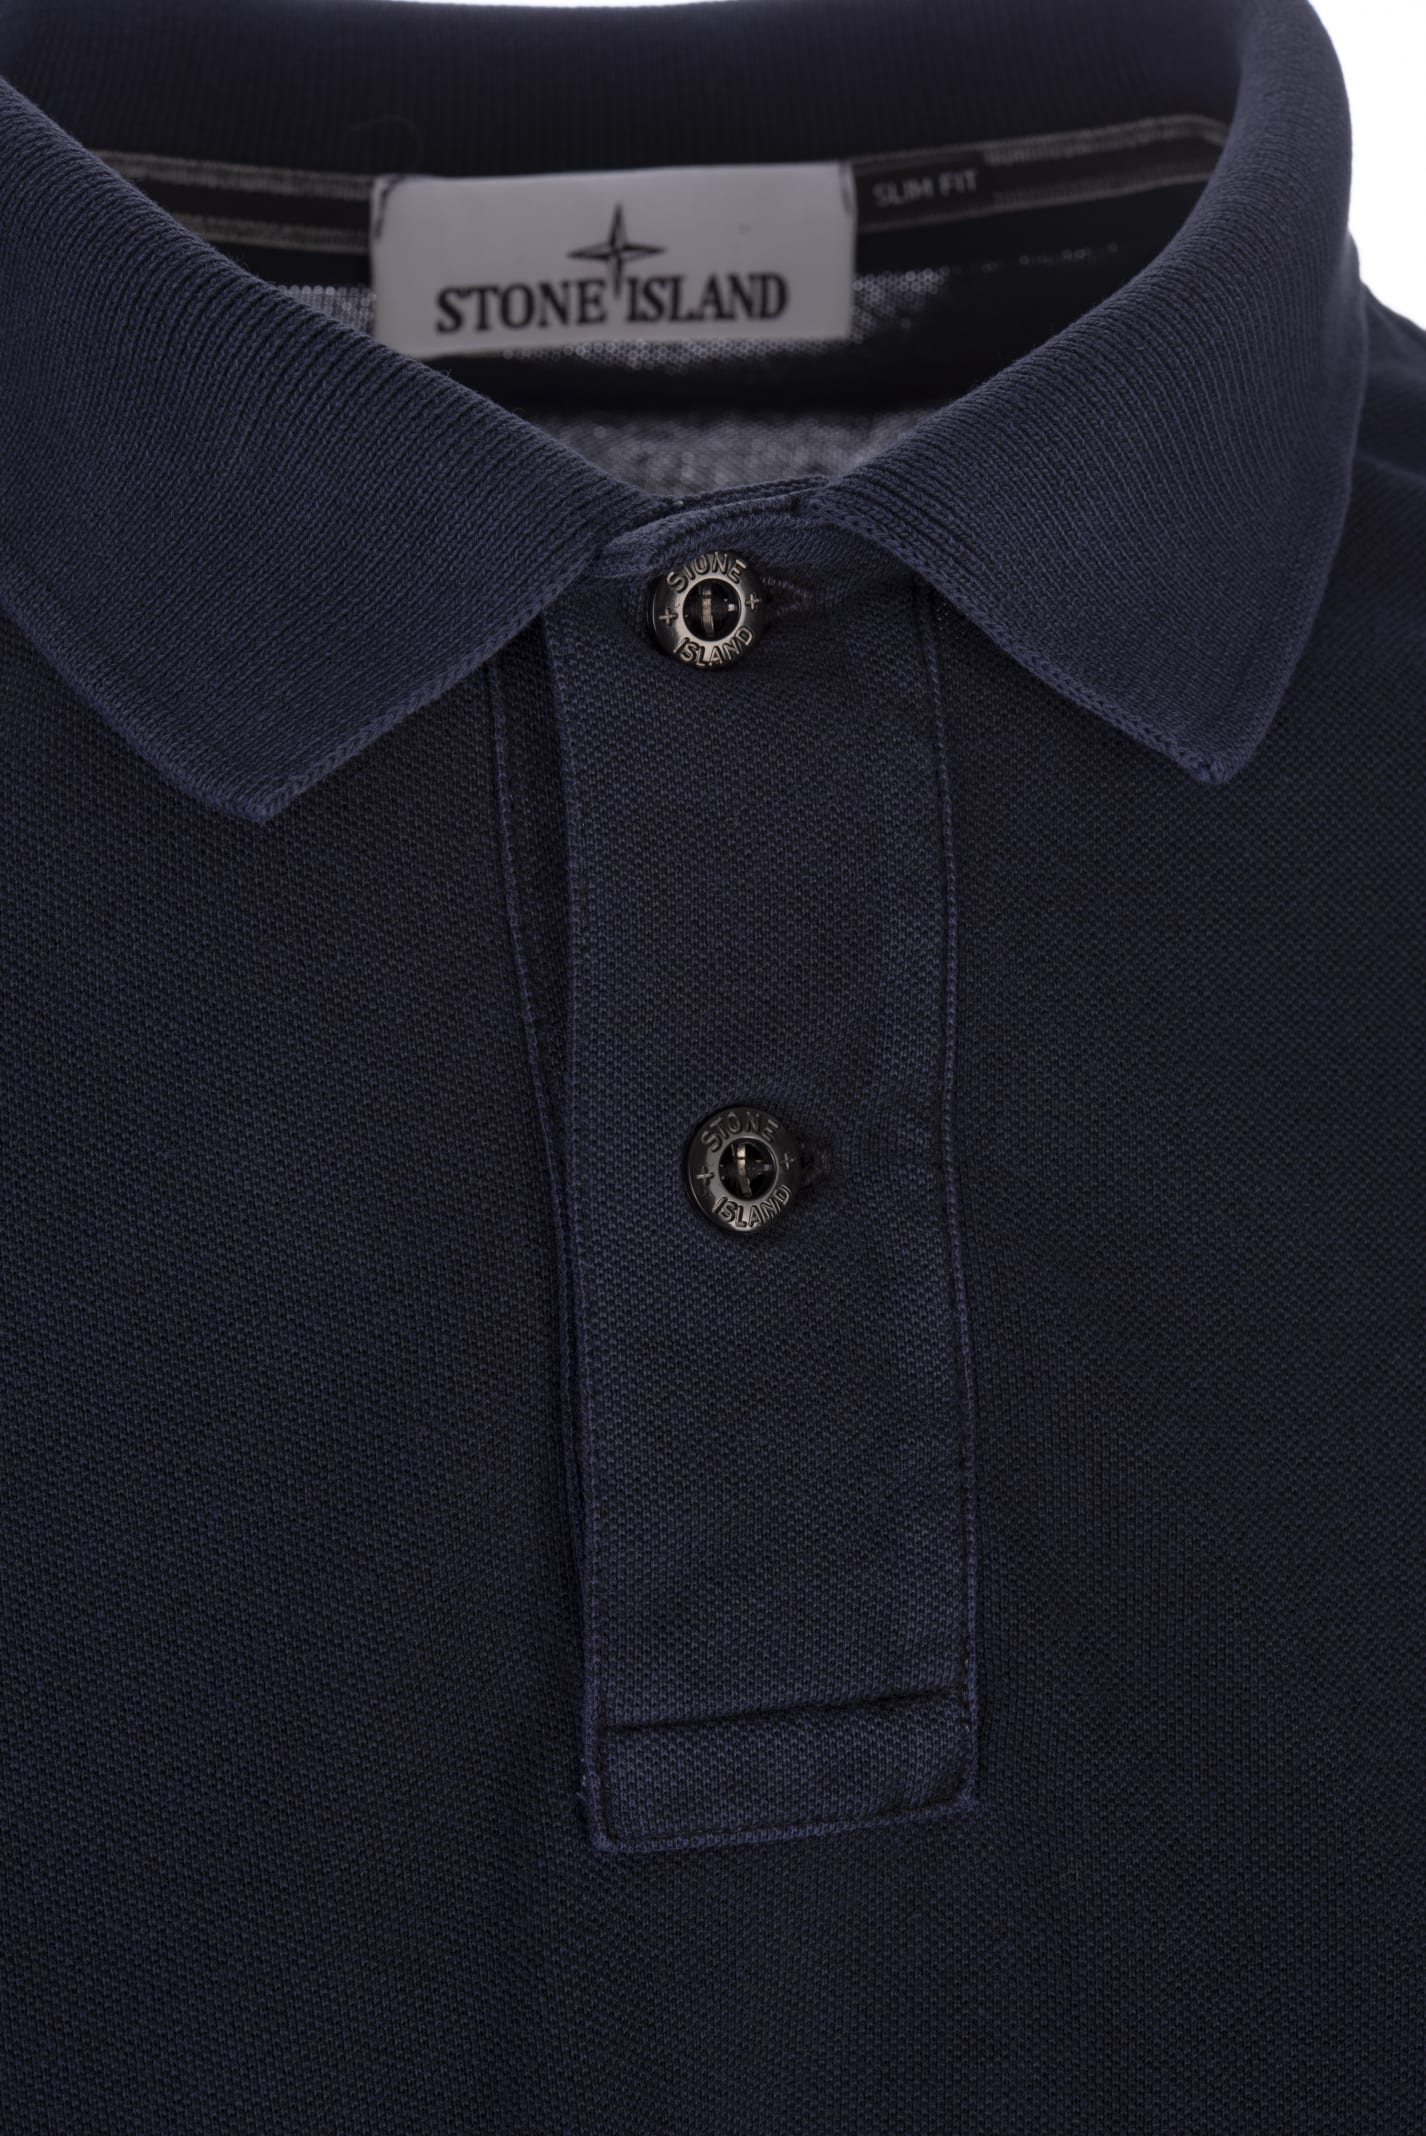 Shop Stone Island Navy Blue Pigment Dyed Slim Fit Polo Shirt